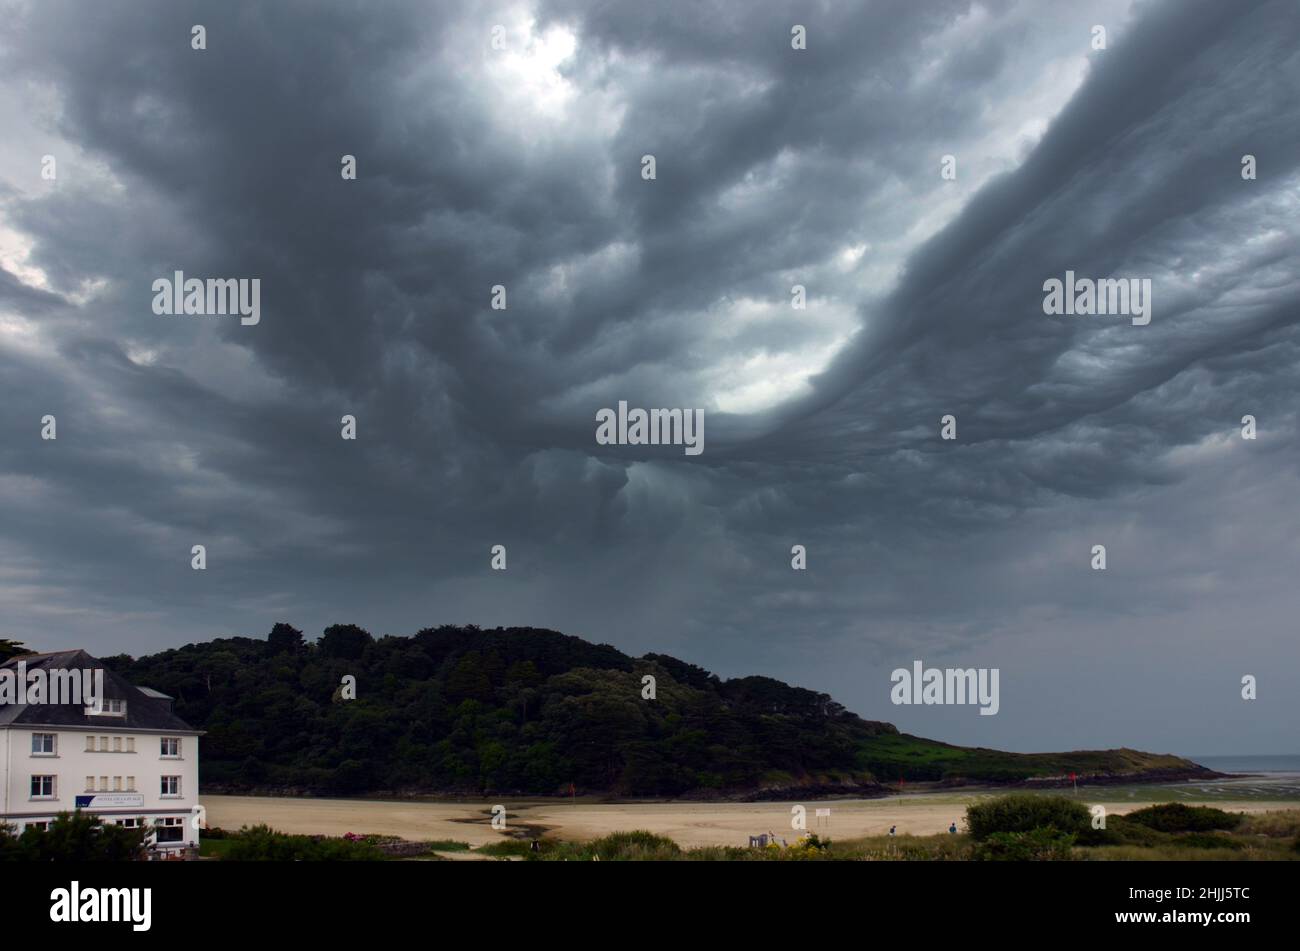 A storm is coming on the beach of Sainte Anne la Palud, near Douarnenez in Brittany. Stock Photo